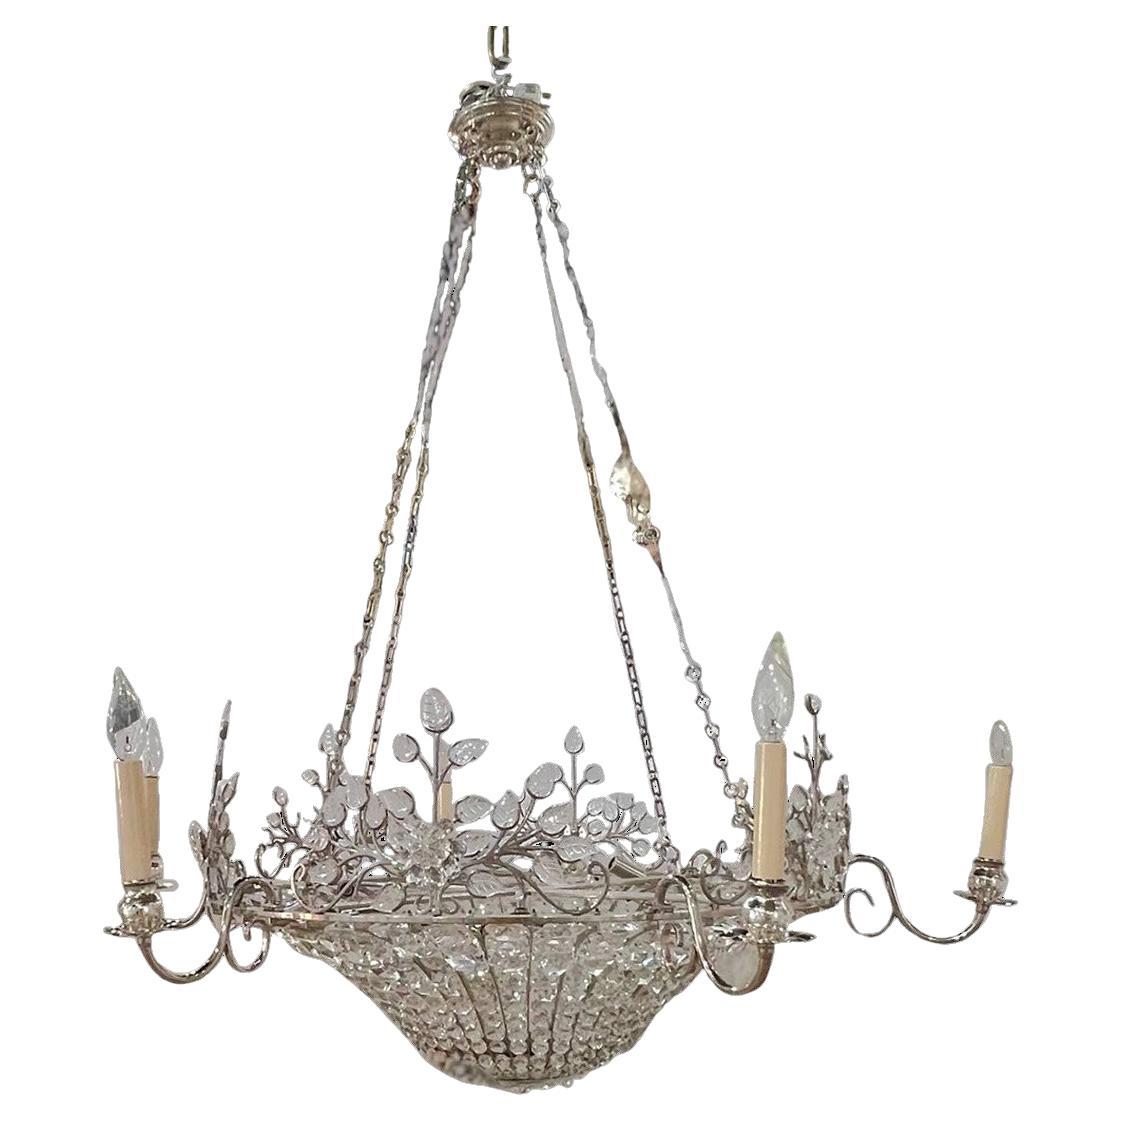 1930's French Silver Plated Crystals Chandelier with 12 Lights For Sale